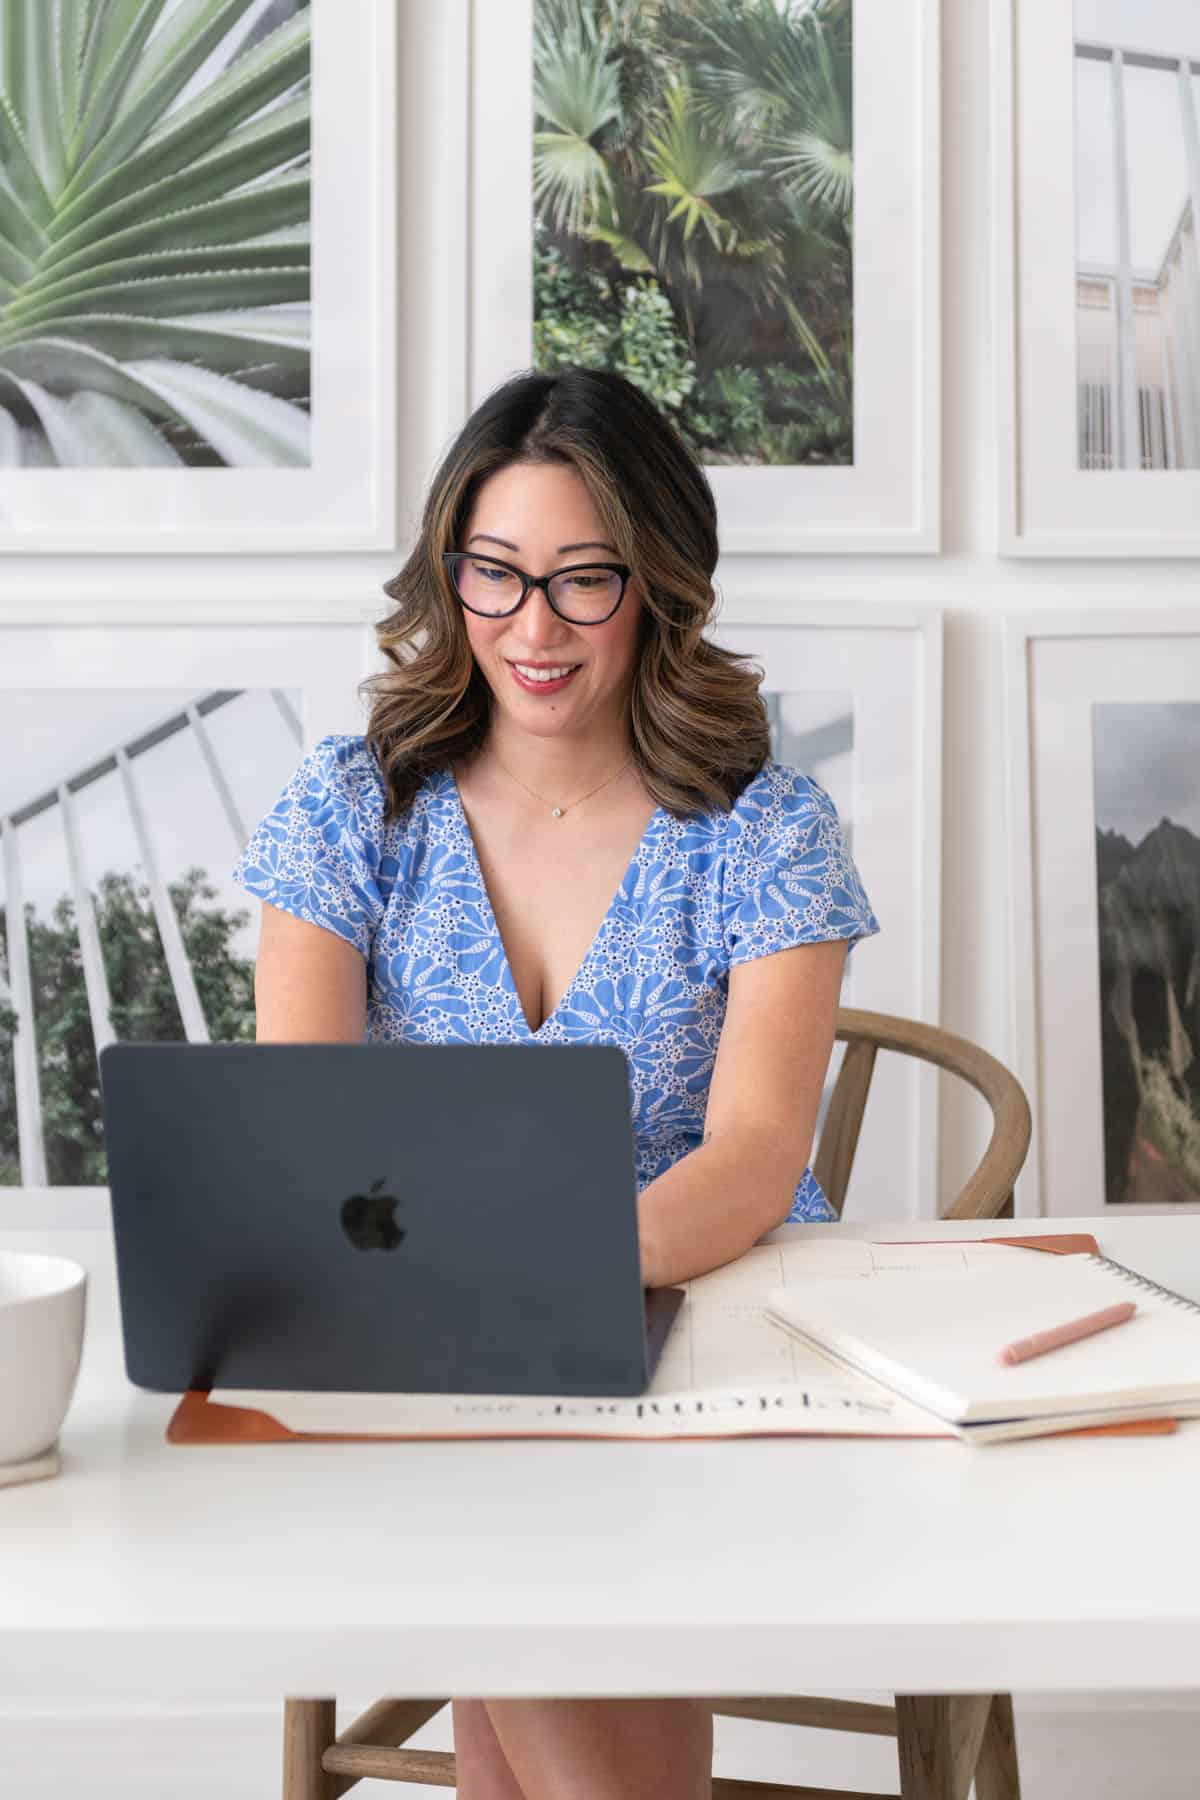 Julie Chiou in a light blue eyelet dress at a desk typing on a black laptop with various framed plant photos in the background